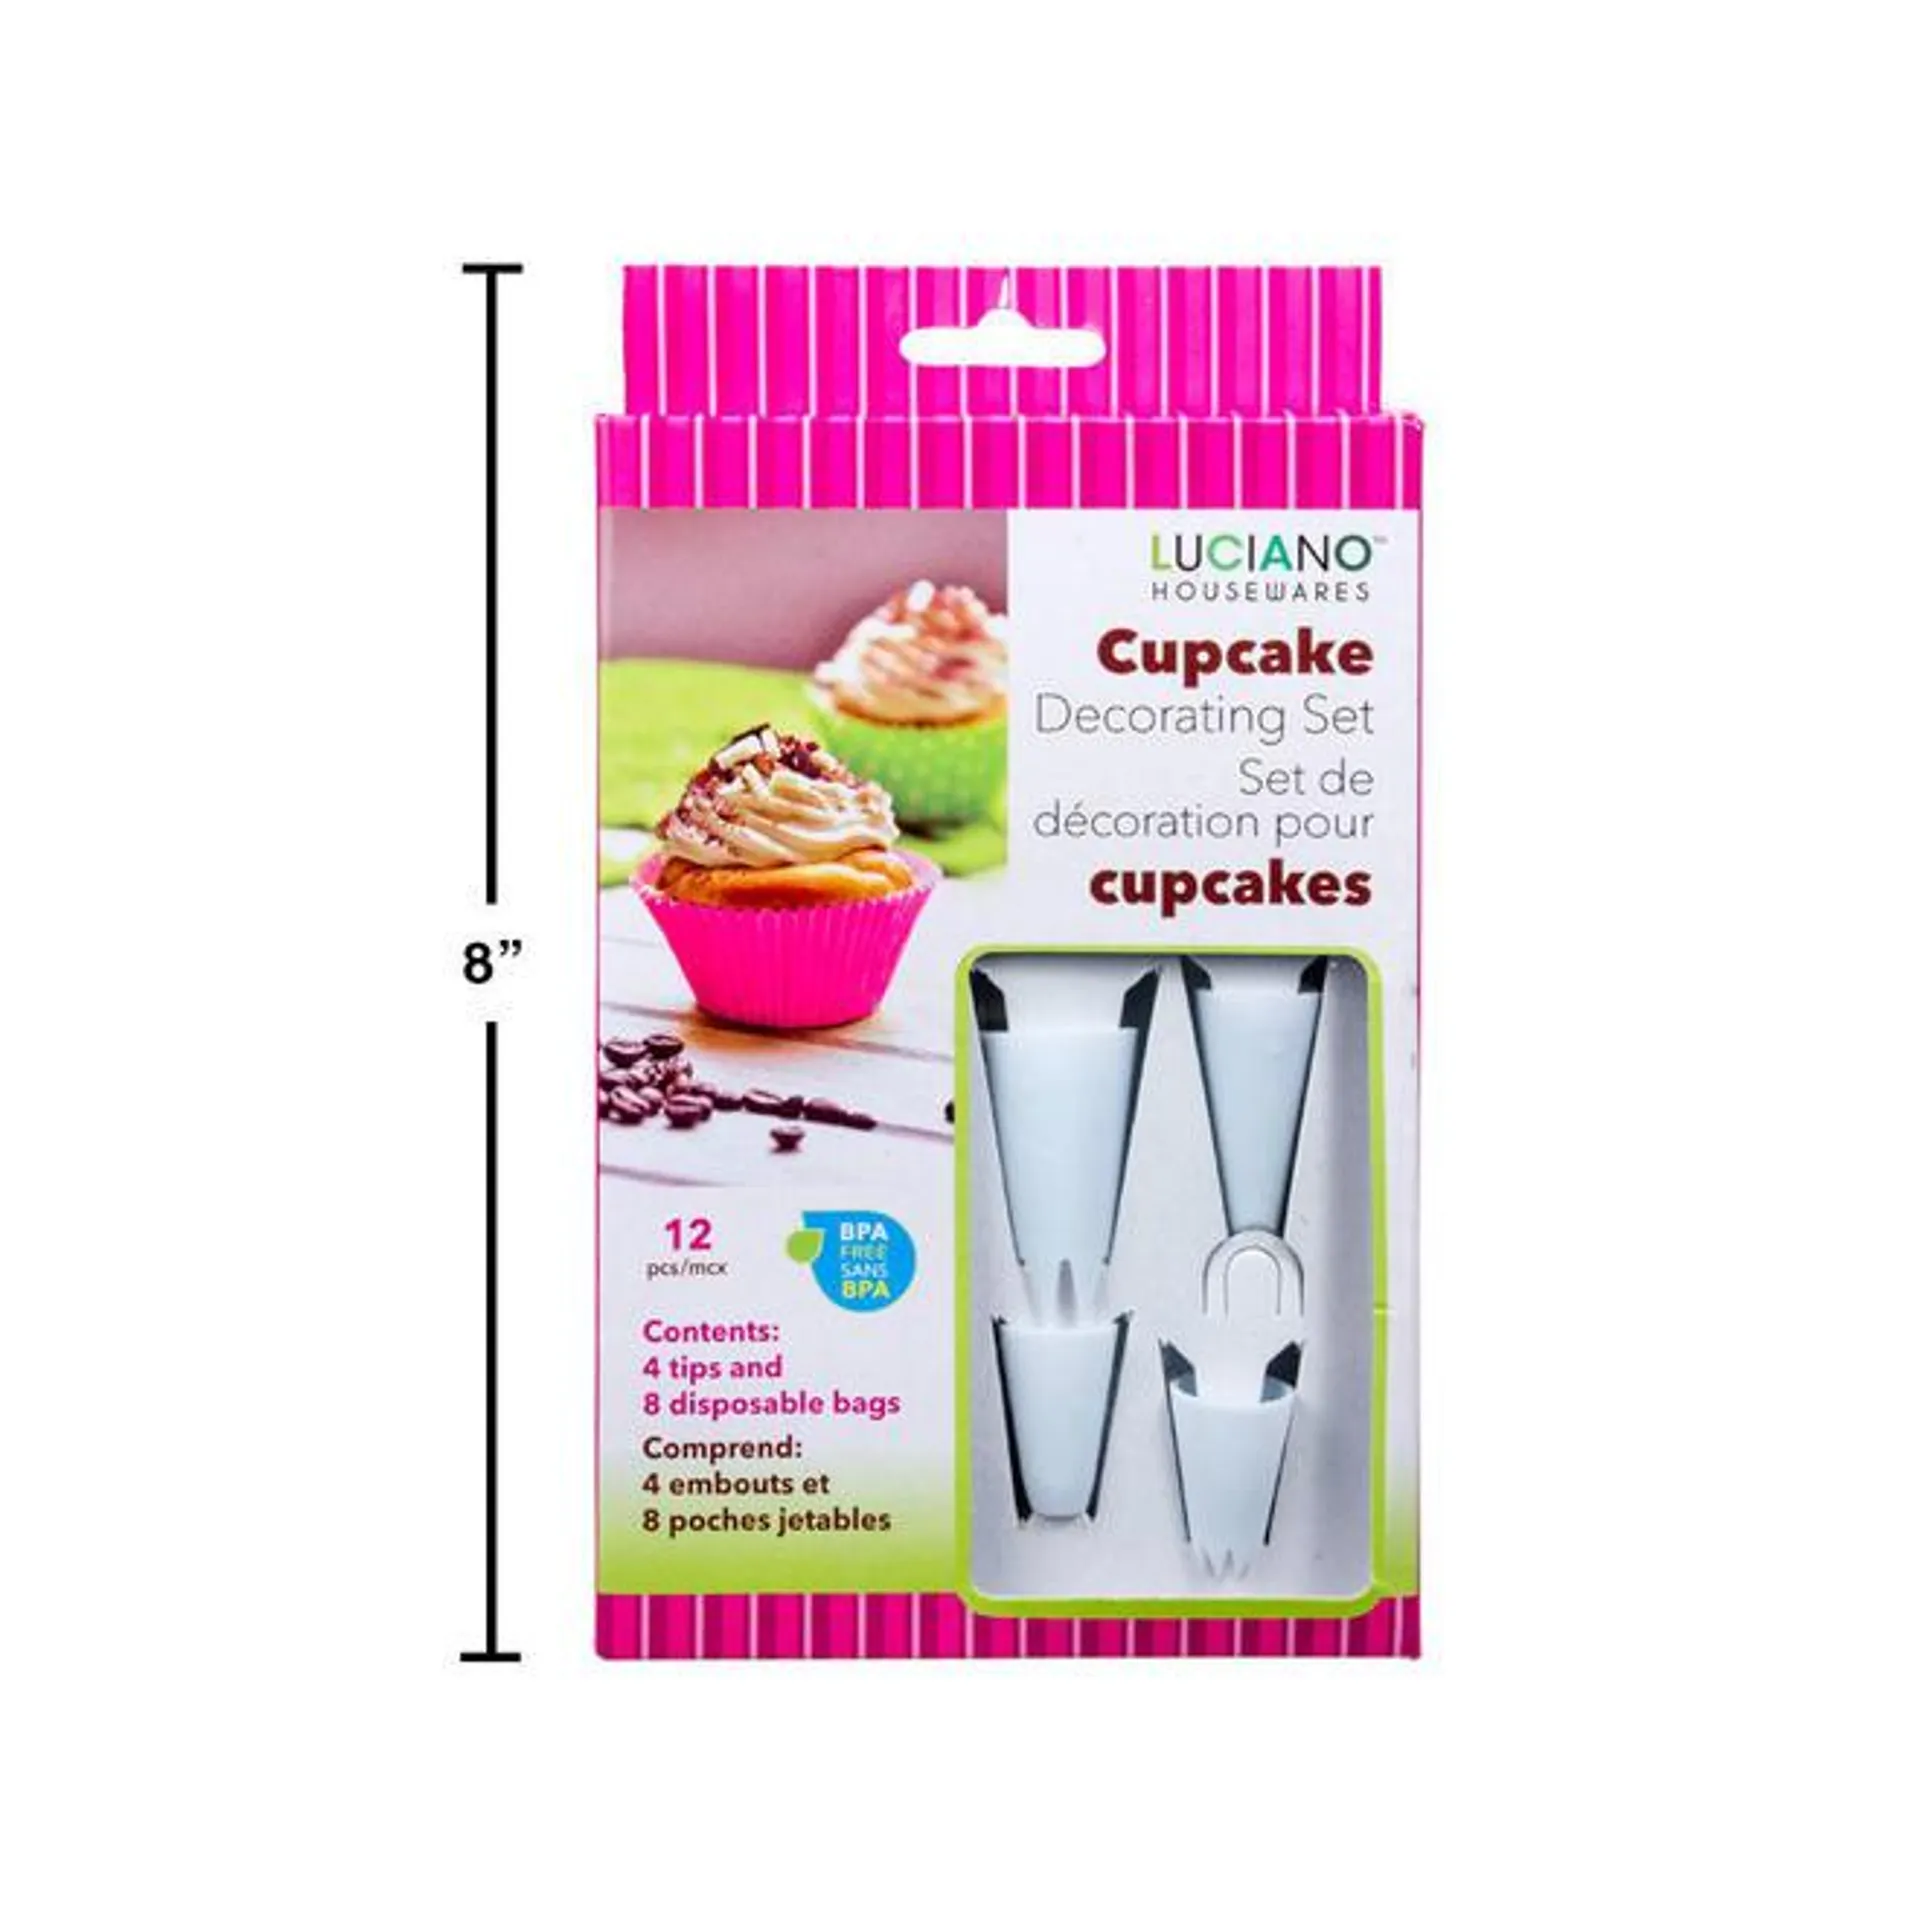 Luciano Plastic Cupcake Decorating Set 4 Icing tips and 8 disposable bags 12Pcs/Pack